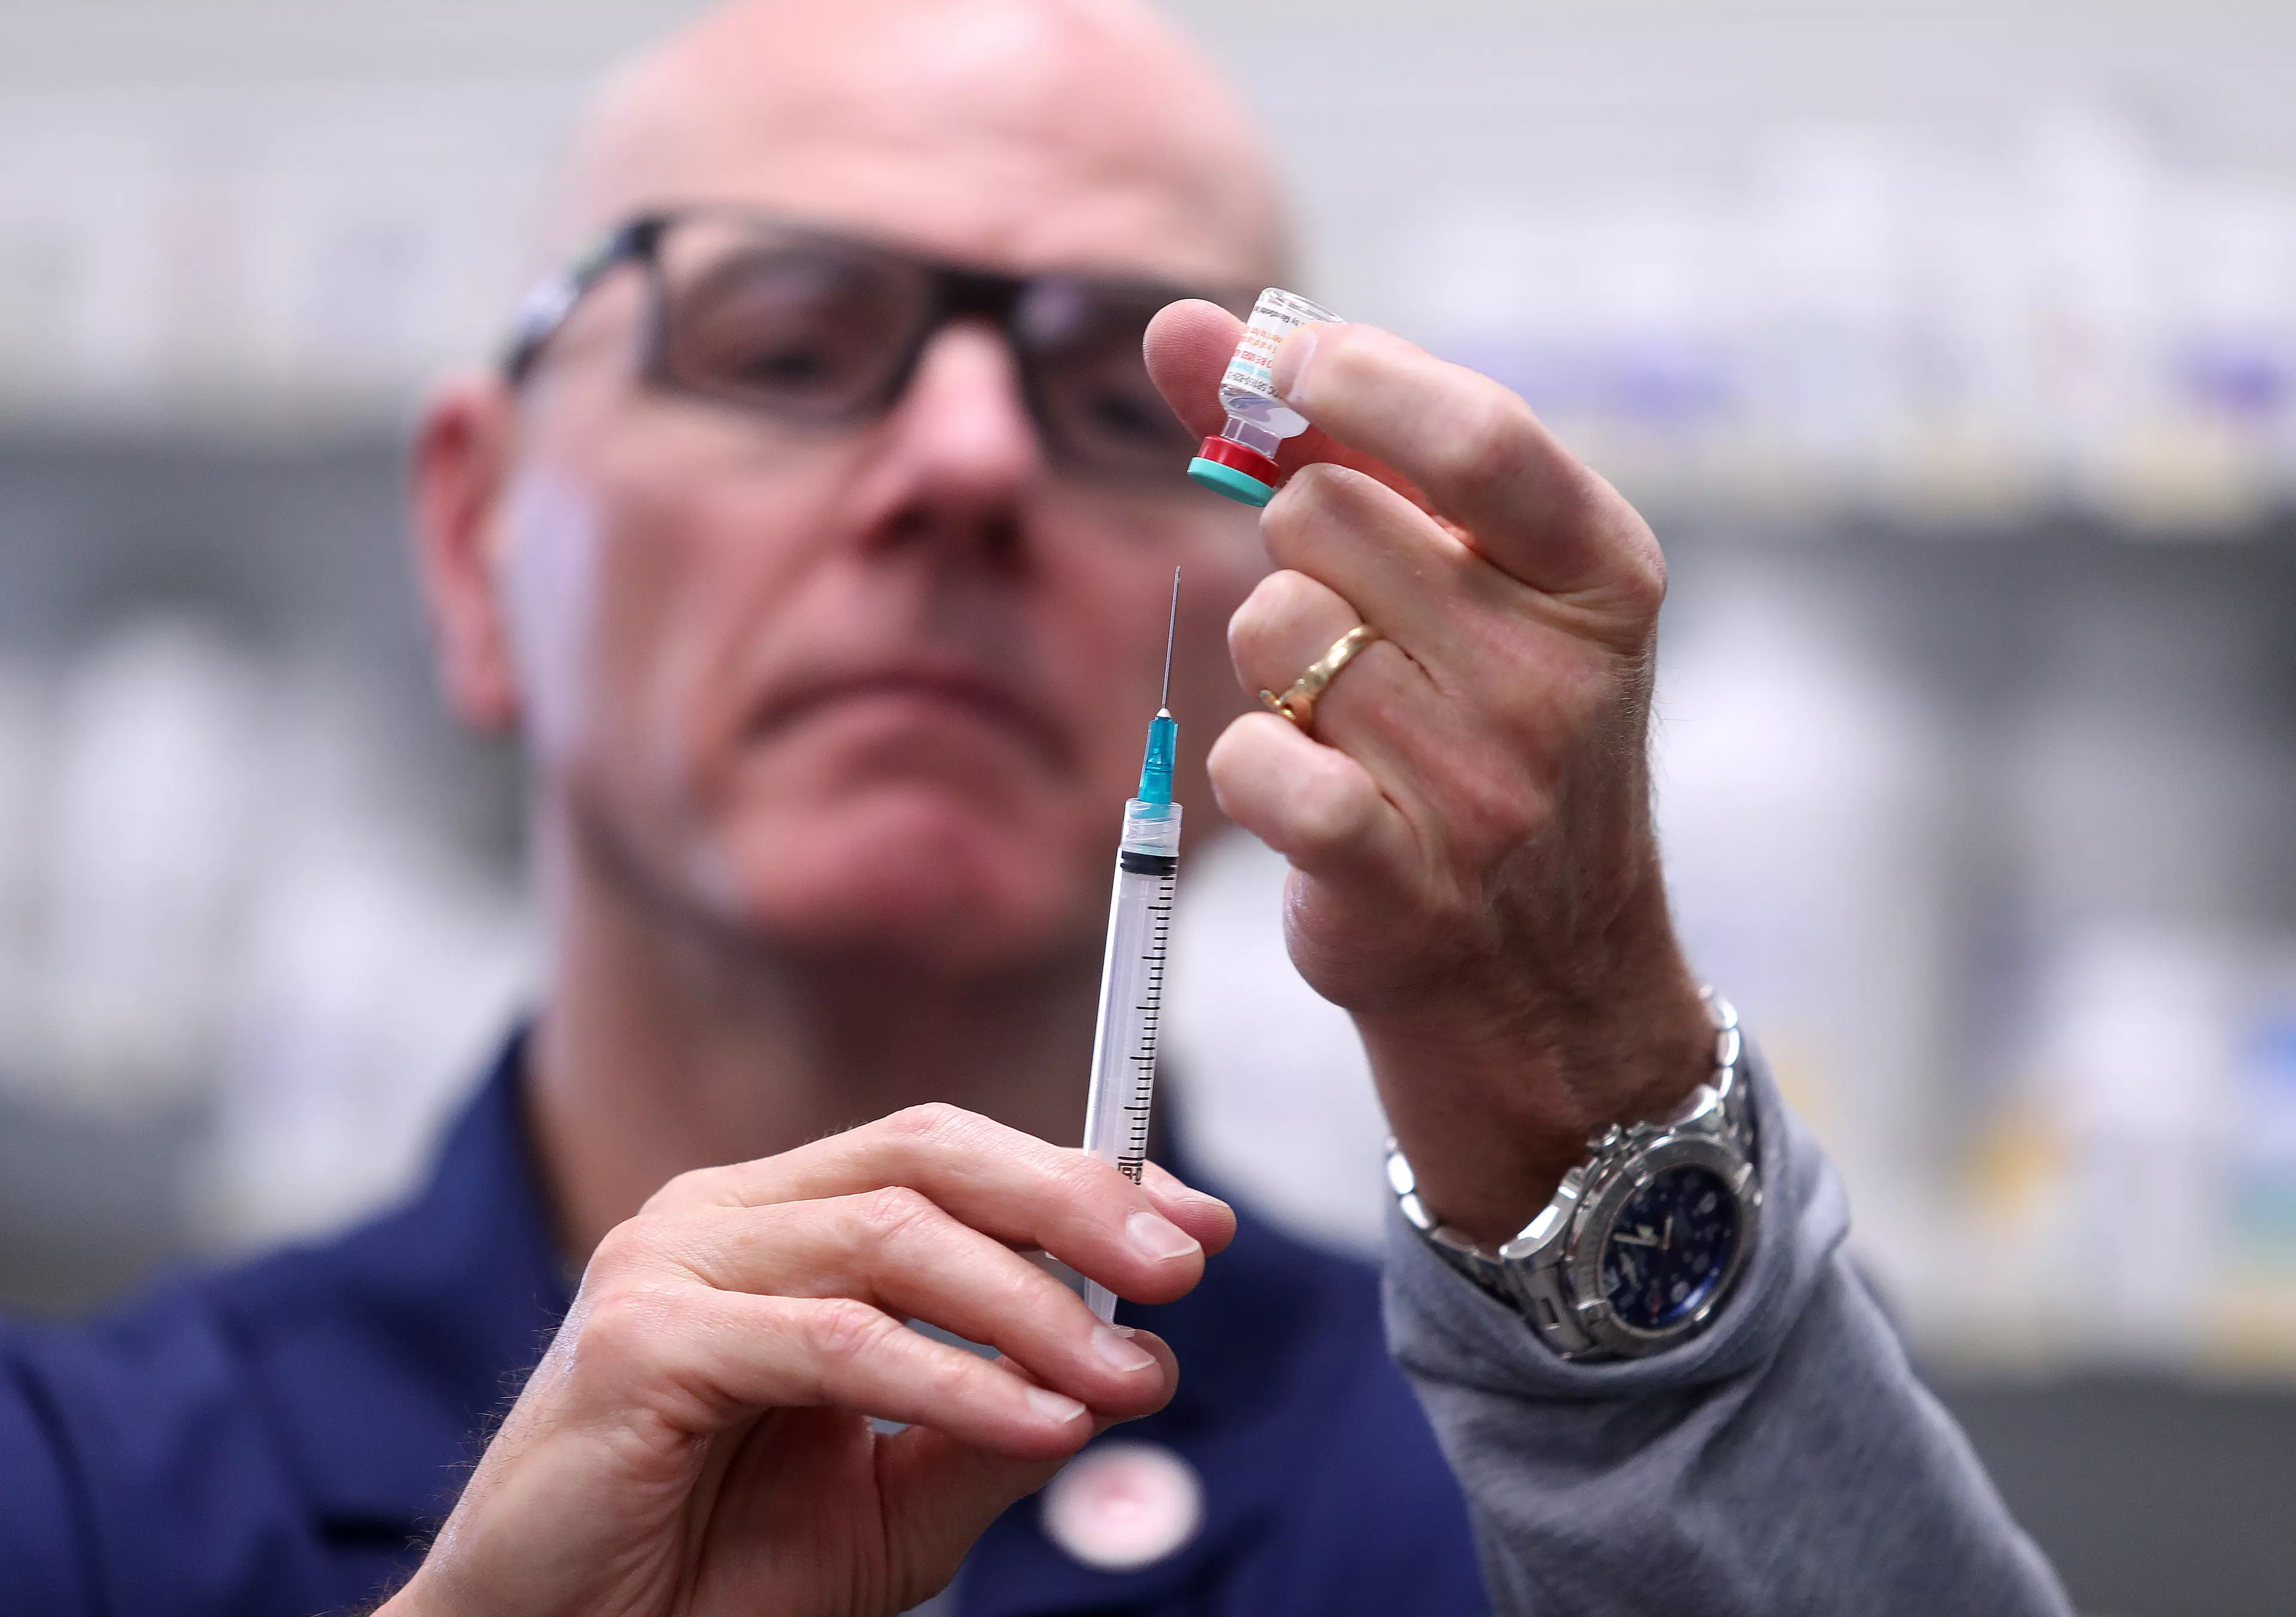 Scientists are racing to find a vaccine (